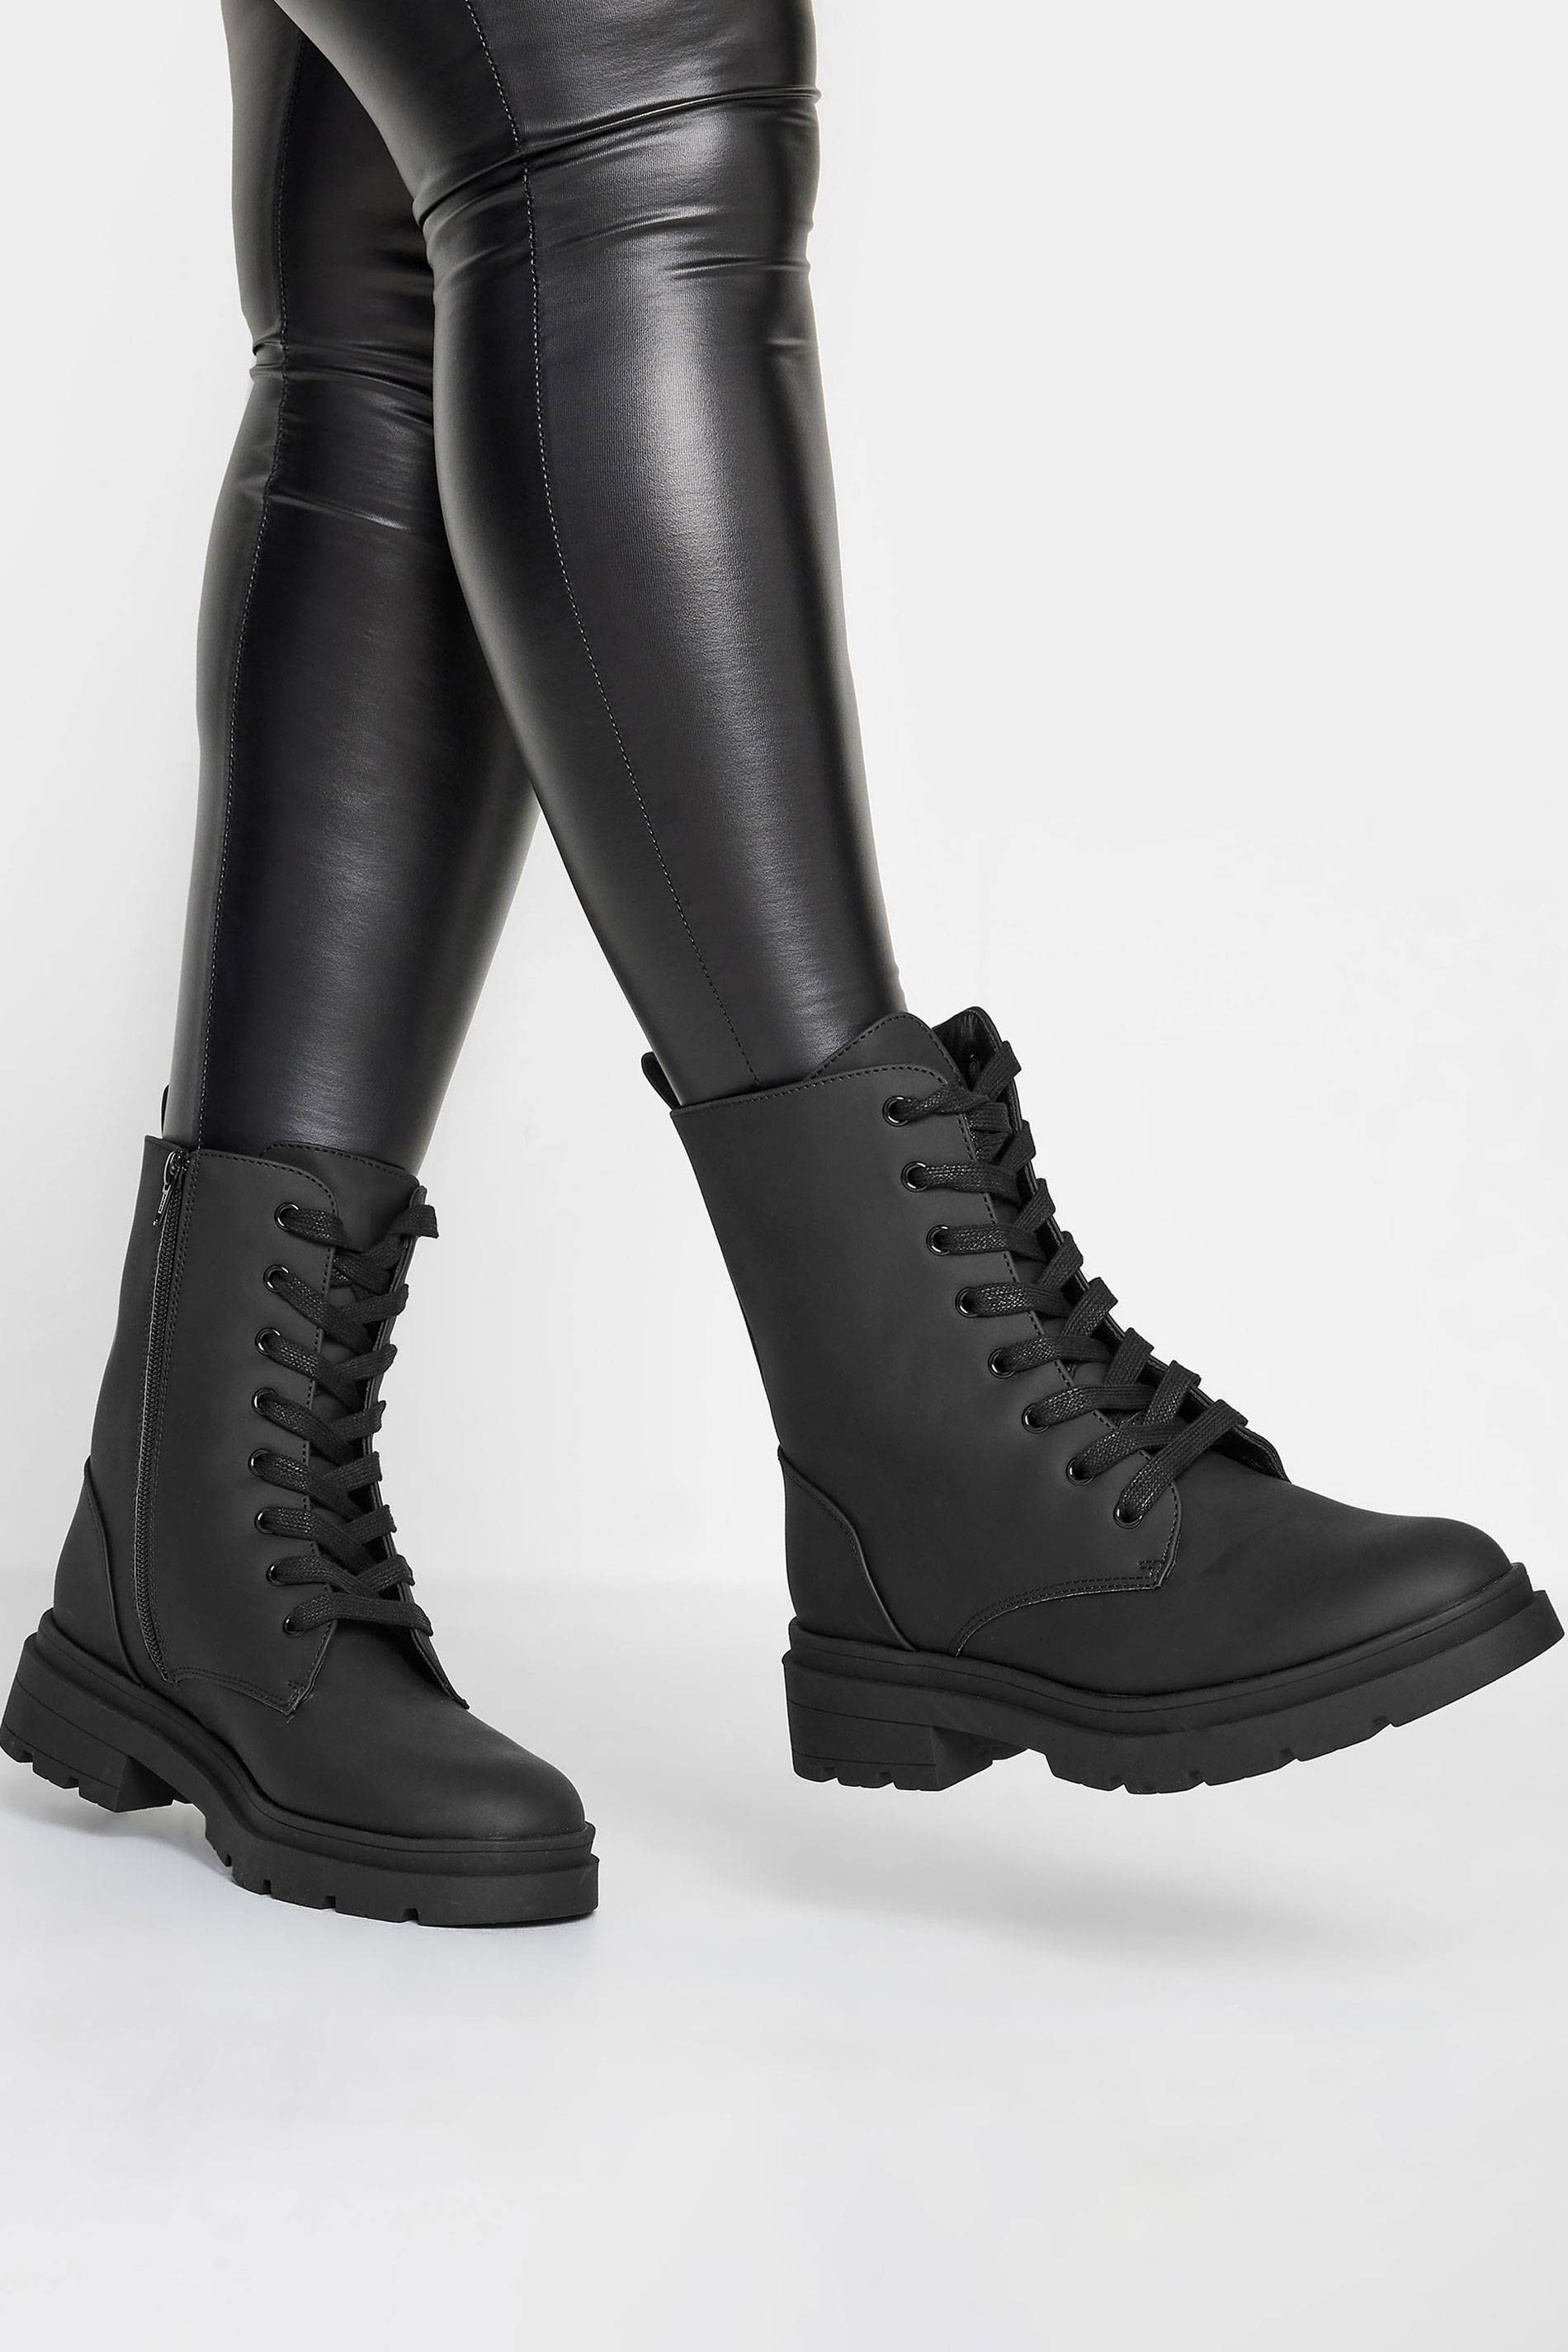 LIMITED COLLECTION Black Chunky Lace Up Boots In Wide E Fit & Extra Wide EEE Fit | Yours Clothing 1